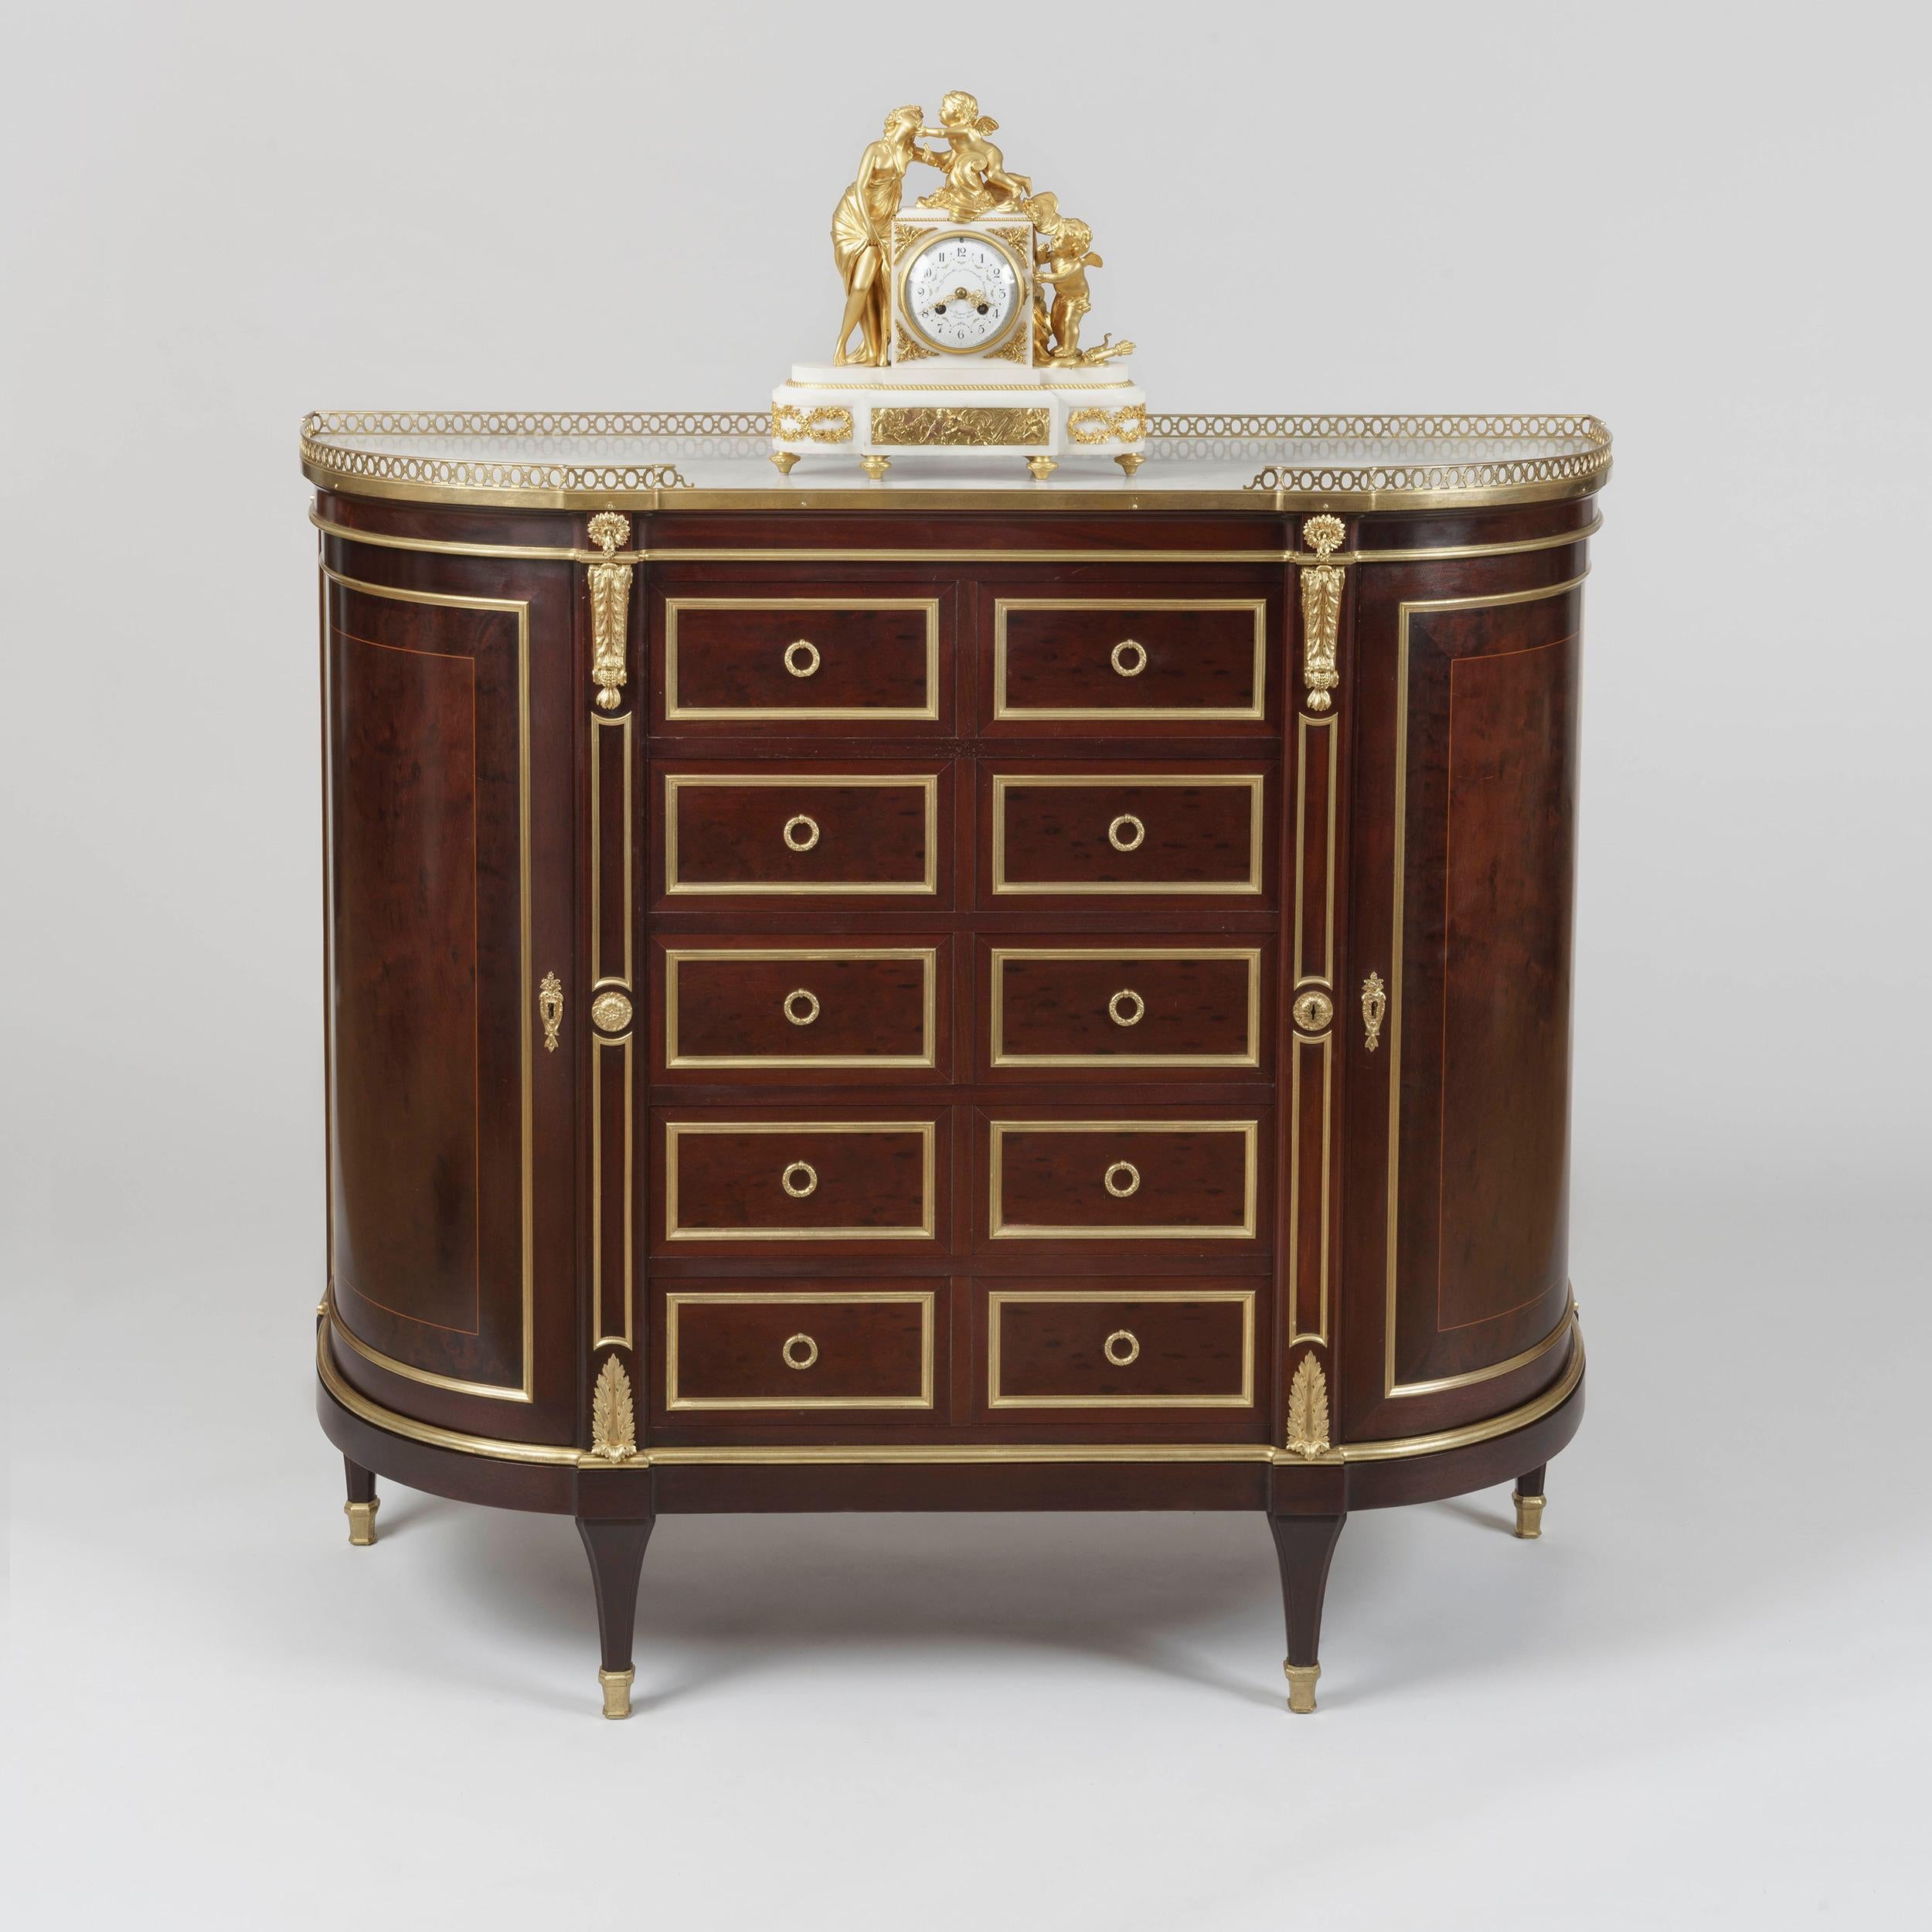 A fine side cabinet in the Louis XVI manner
By G. Durand of Paris

Of elegant demilune form and employing exquisite flamed Cuban mahogany, the whole dressed with restrained neoclassical mounts in the manner of Jean-Henri Riesener; rising from